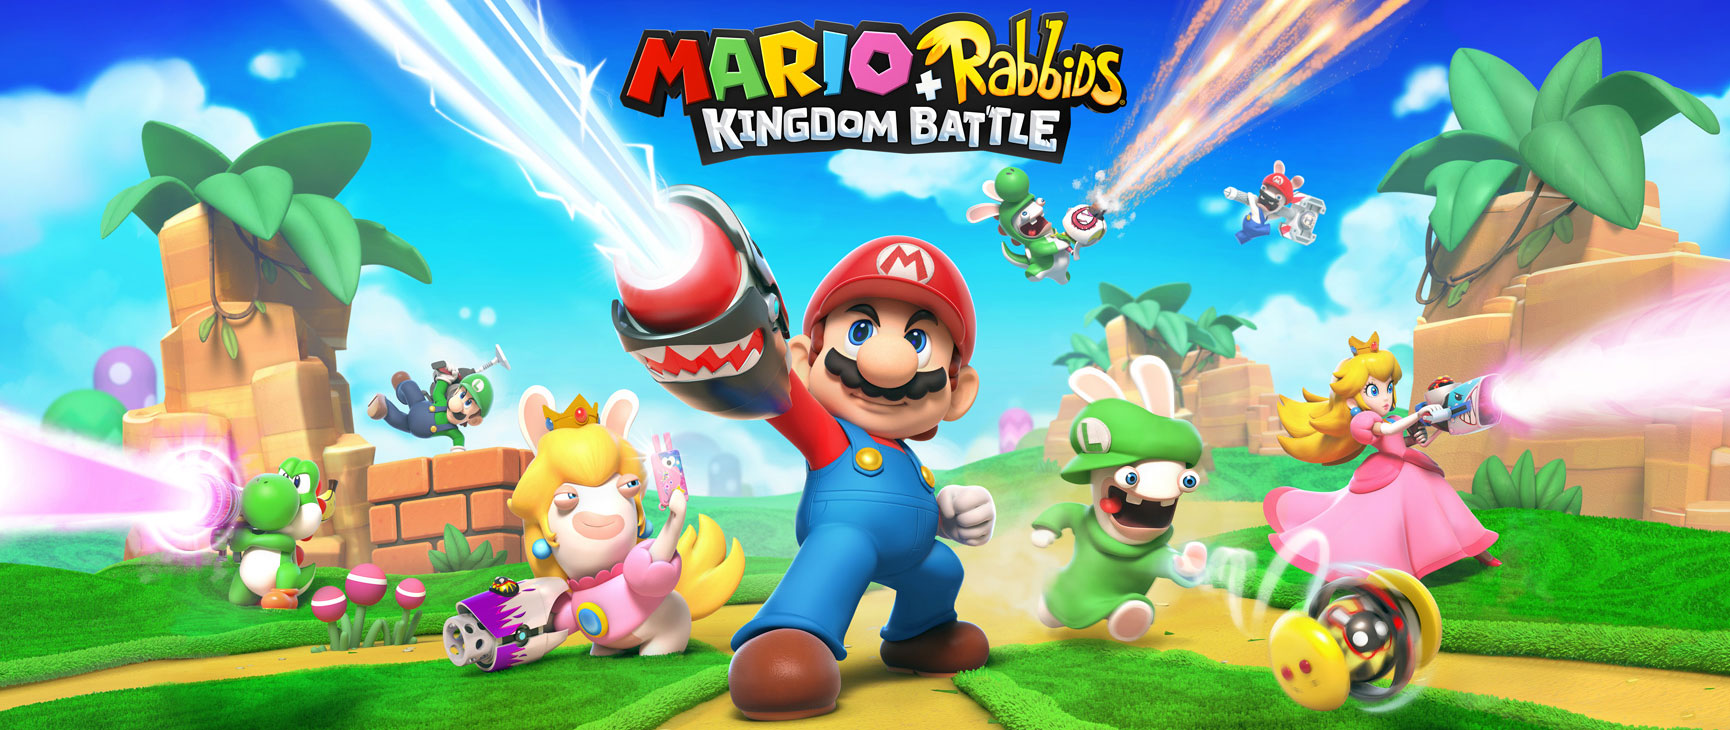 Mario + Rabbids Kingdom Battle' Is the Perfect Bedtime Game